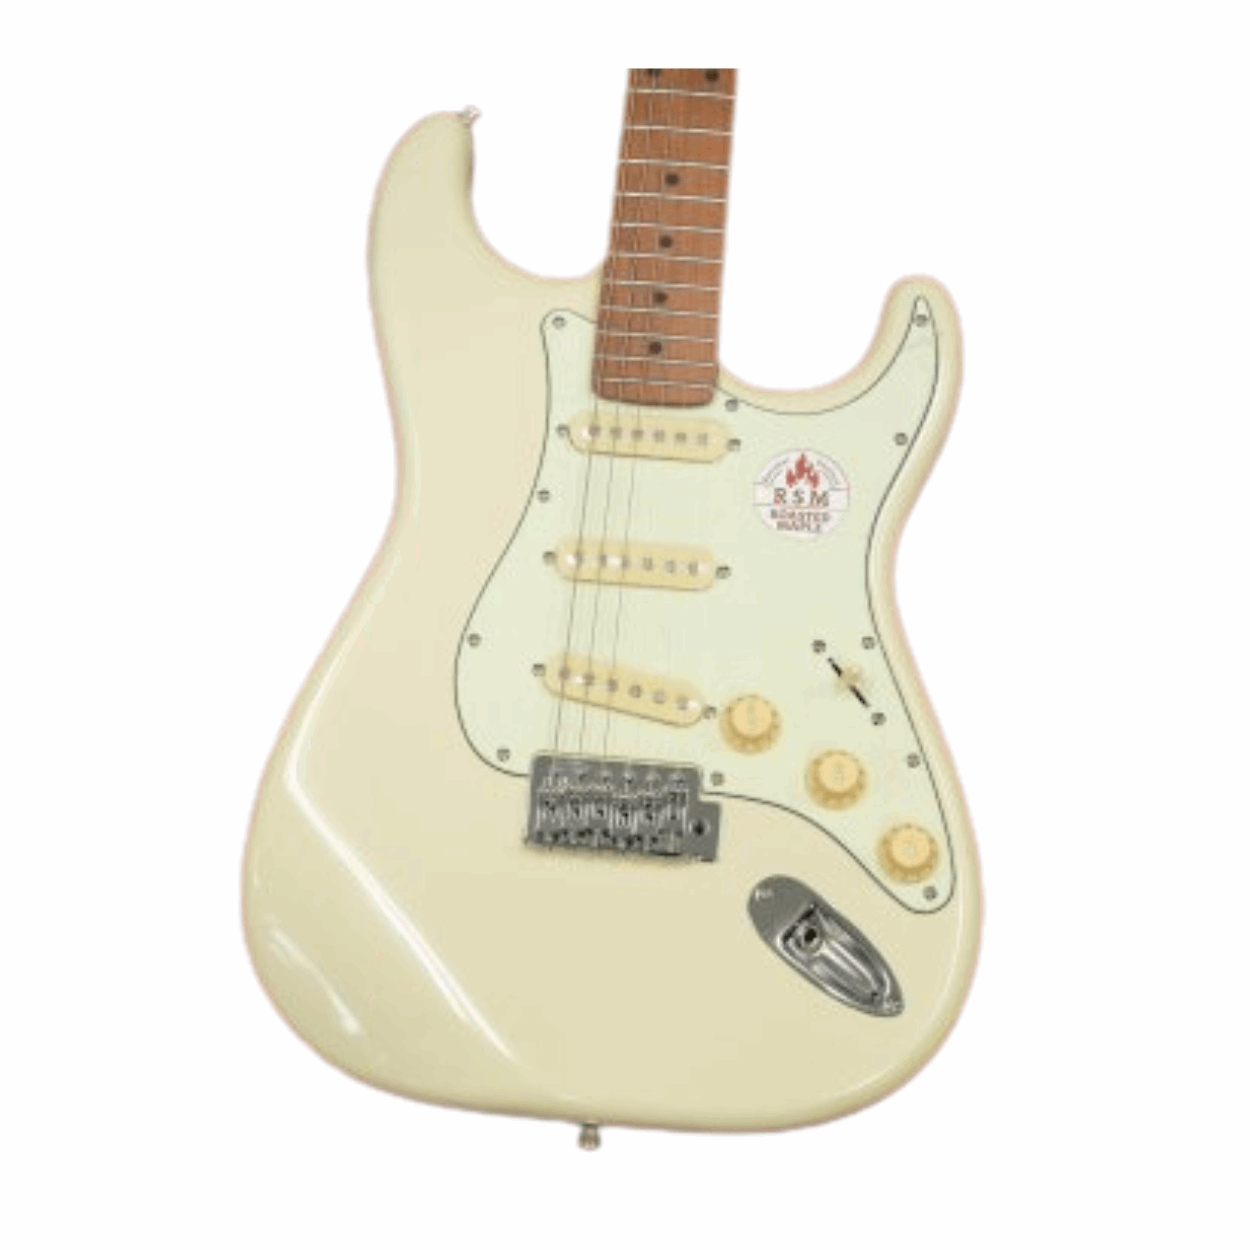 Bacchus Bst-1-rsm/m-owh Universe Series Roasted Maple Electric Guitar, Olympic White With Bag